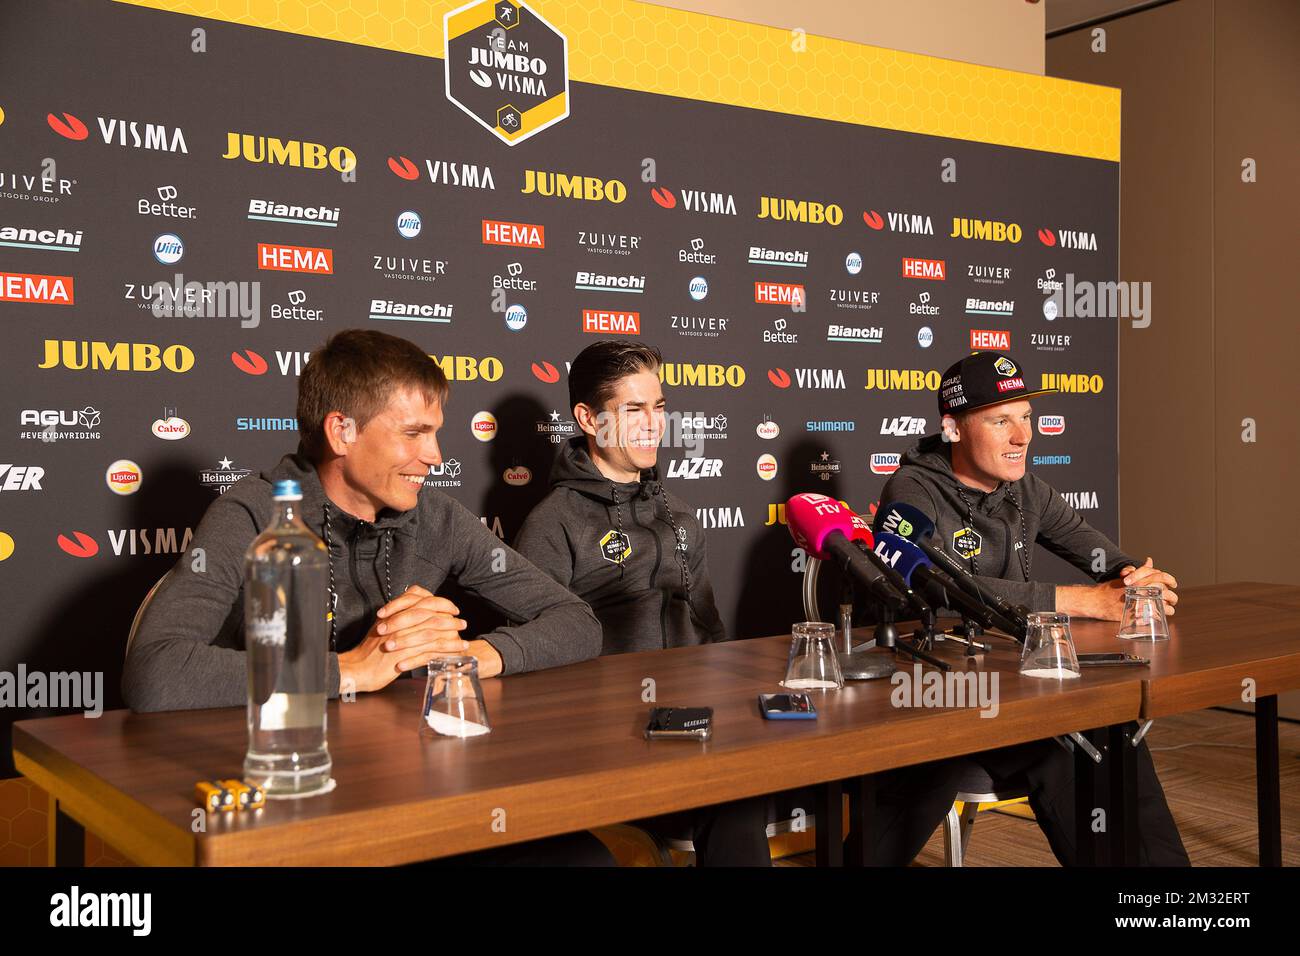 Norwegian Amund Grondahl Jansen, Belgian Wout Van Aert and Dutch Mike Teunissen of Team Jumbo-Visma pictured at press conference of Jumbo-Vista cycling team in Gent, ahead of the 75th edition of the one-day cycling race Omloop Het Nieuwsblad, Friday 28 February 2020. BELGA PHOTO JAMES ARTHUR GEKIERE Stock Photo